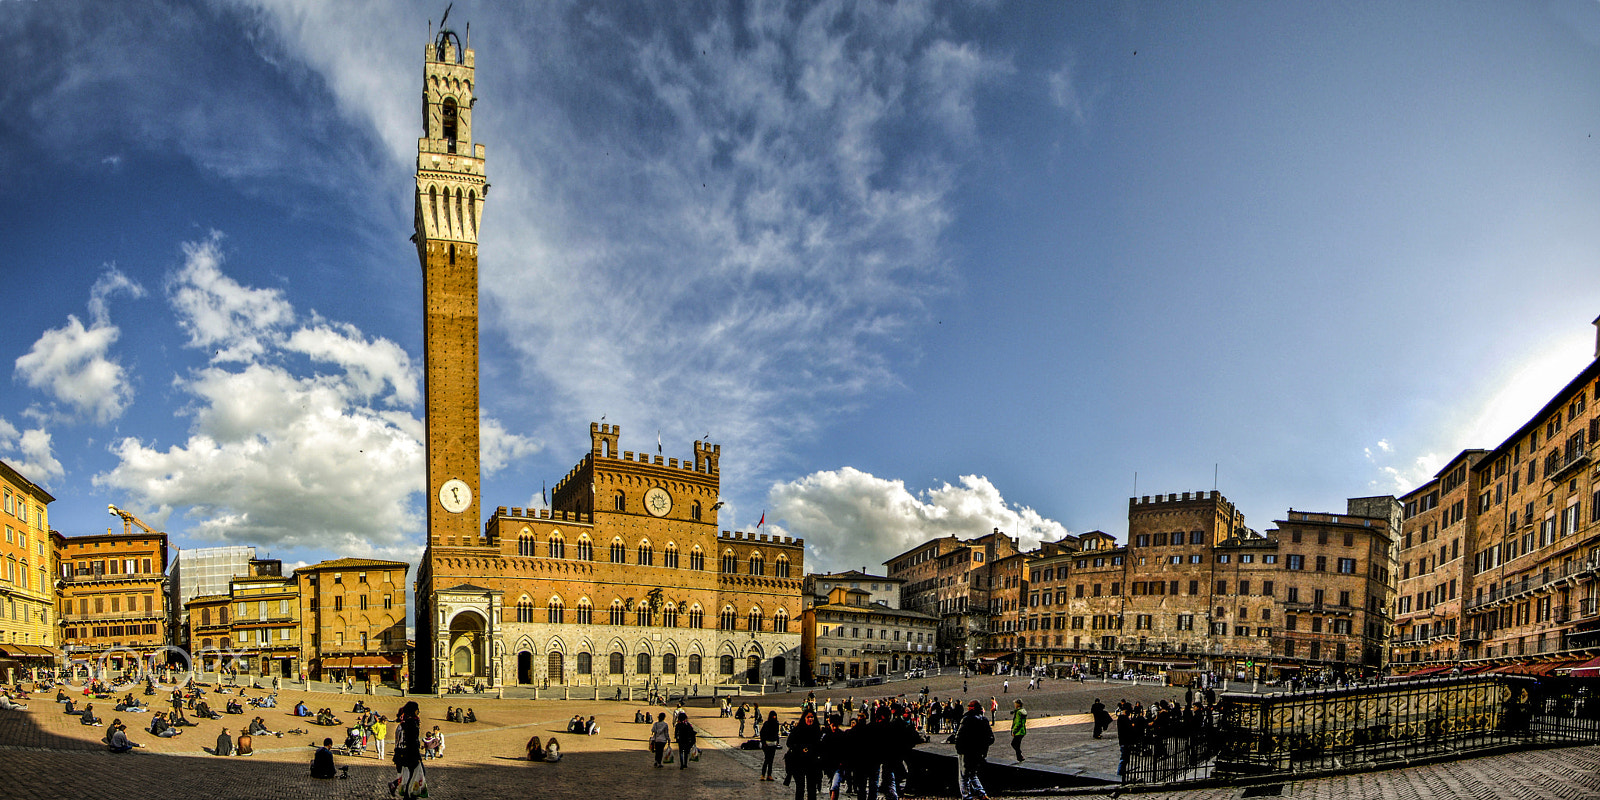 Nikon D2Xs + Tamron SP AF 10-24mm F3.5-4.5 Di II LD Aspherical (IF) sample photo. Siena piazza del campo photography